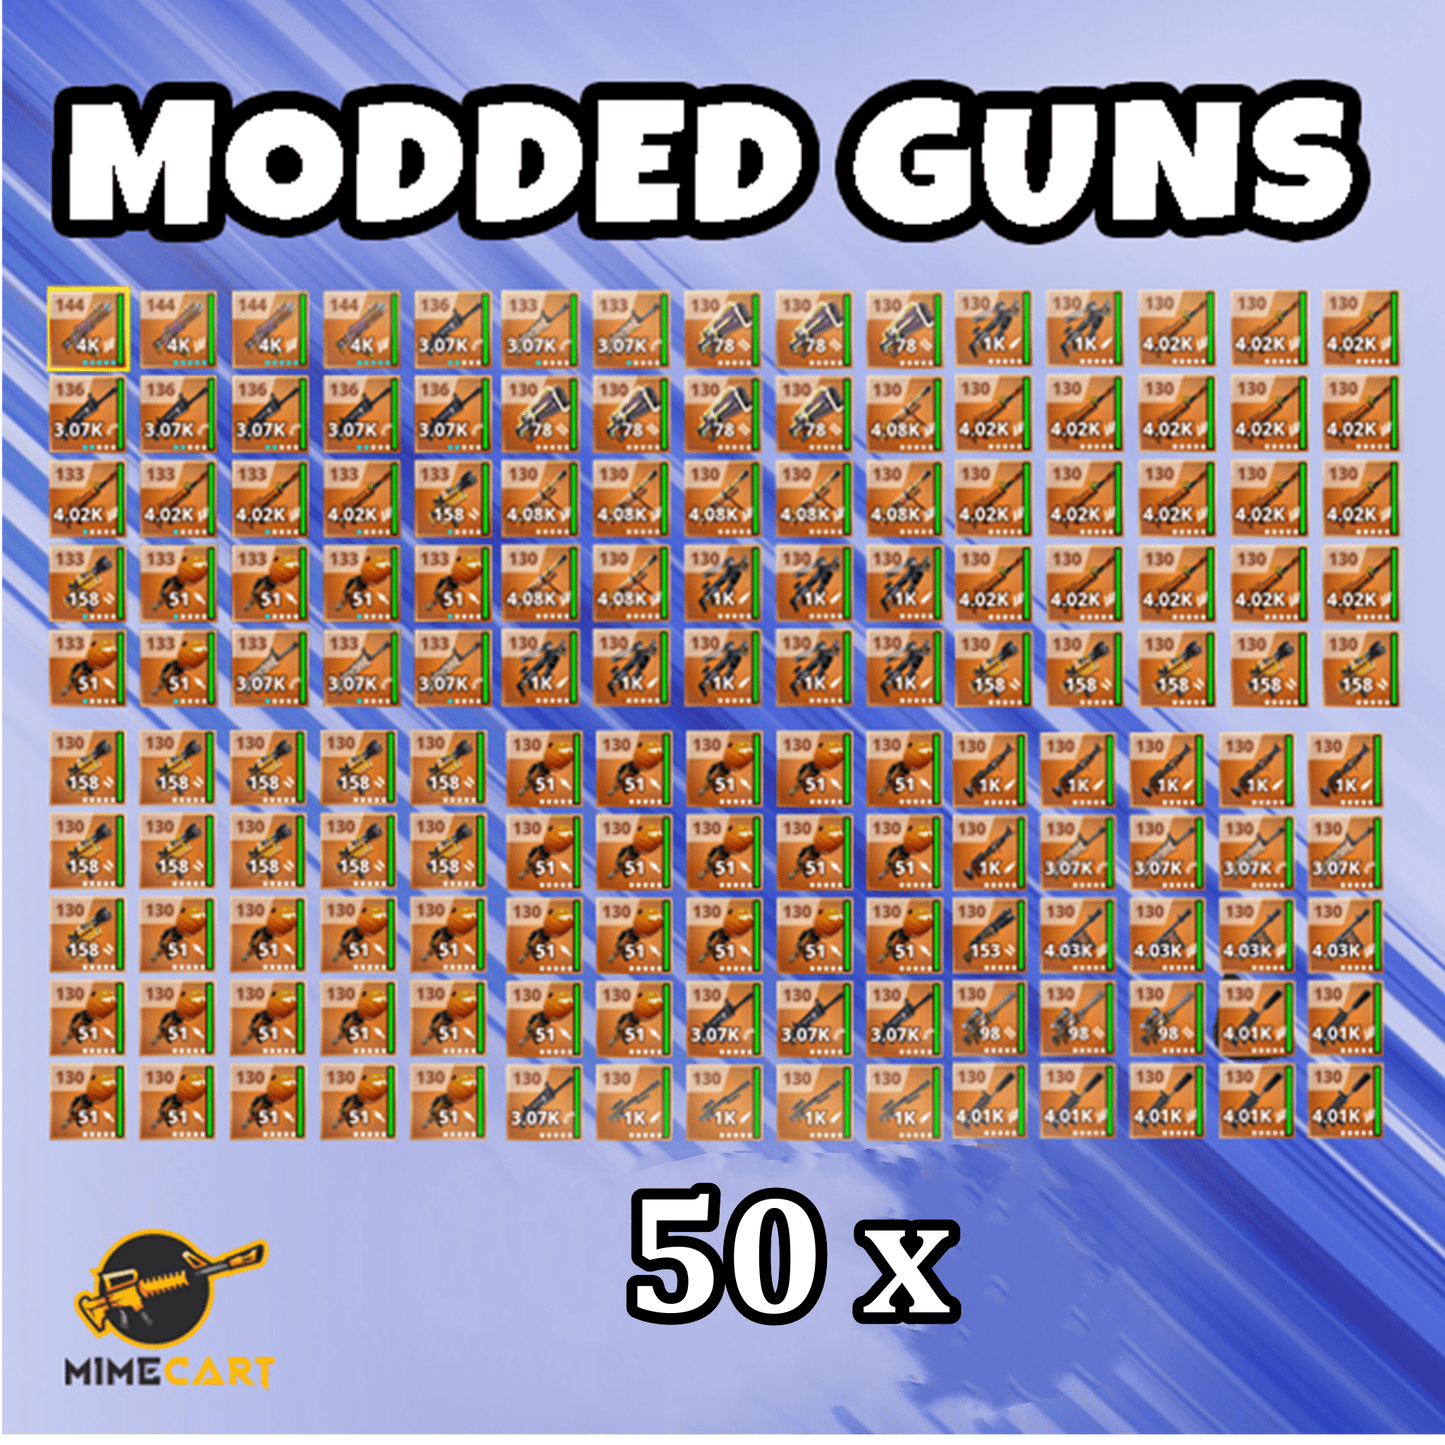 Special Modded Bundle - 50 Modded Weapons!